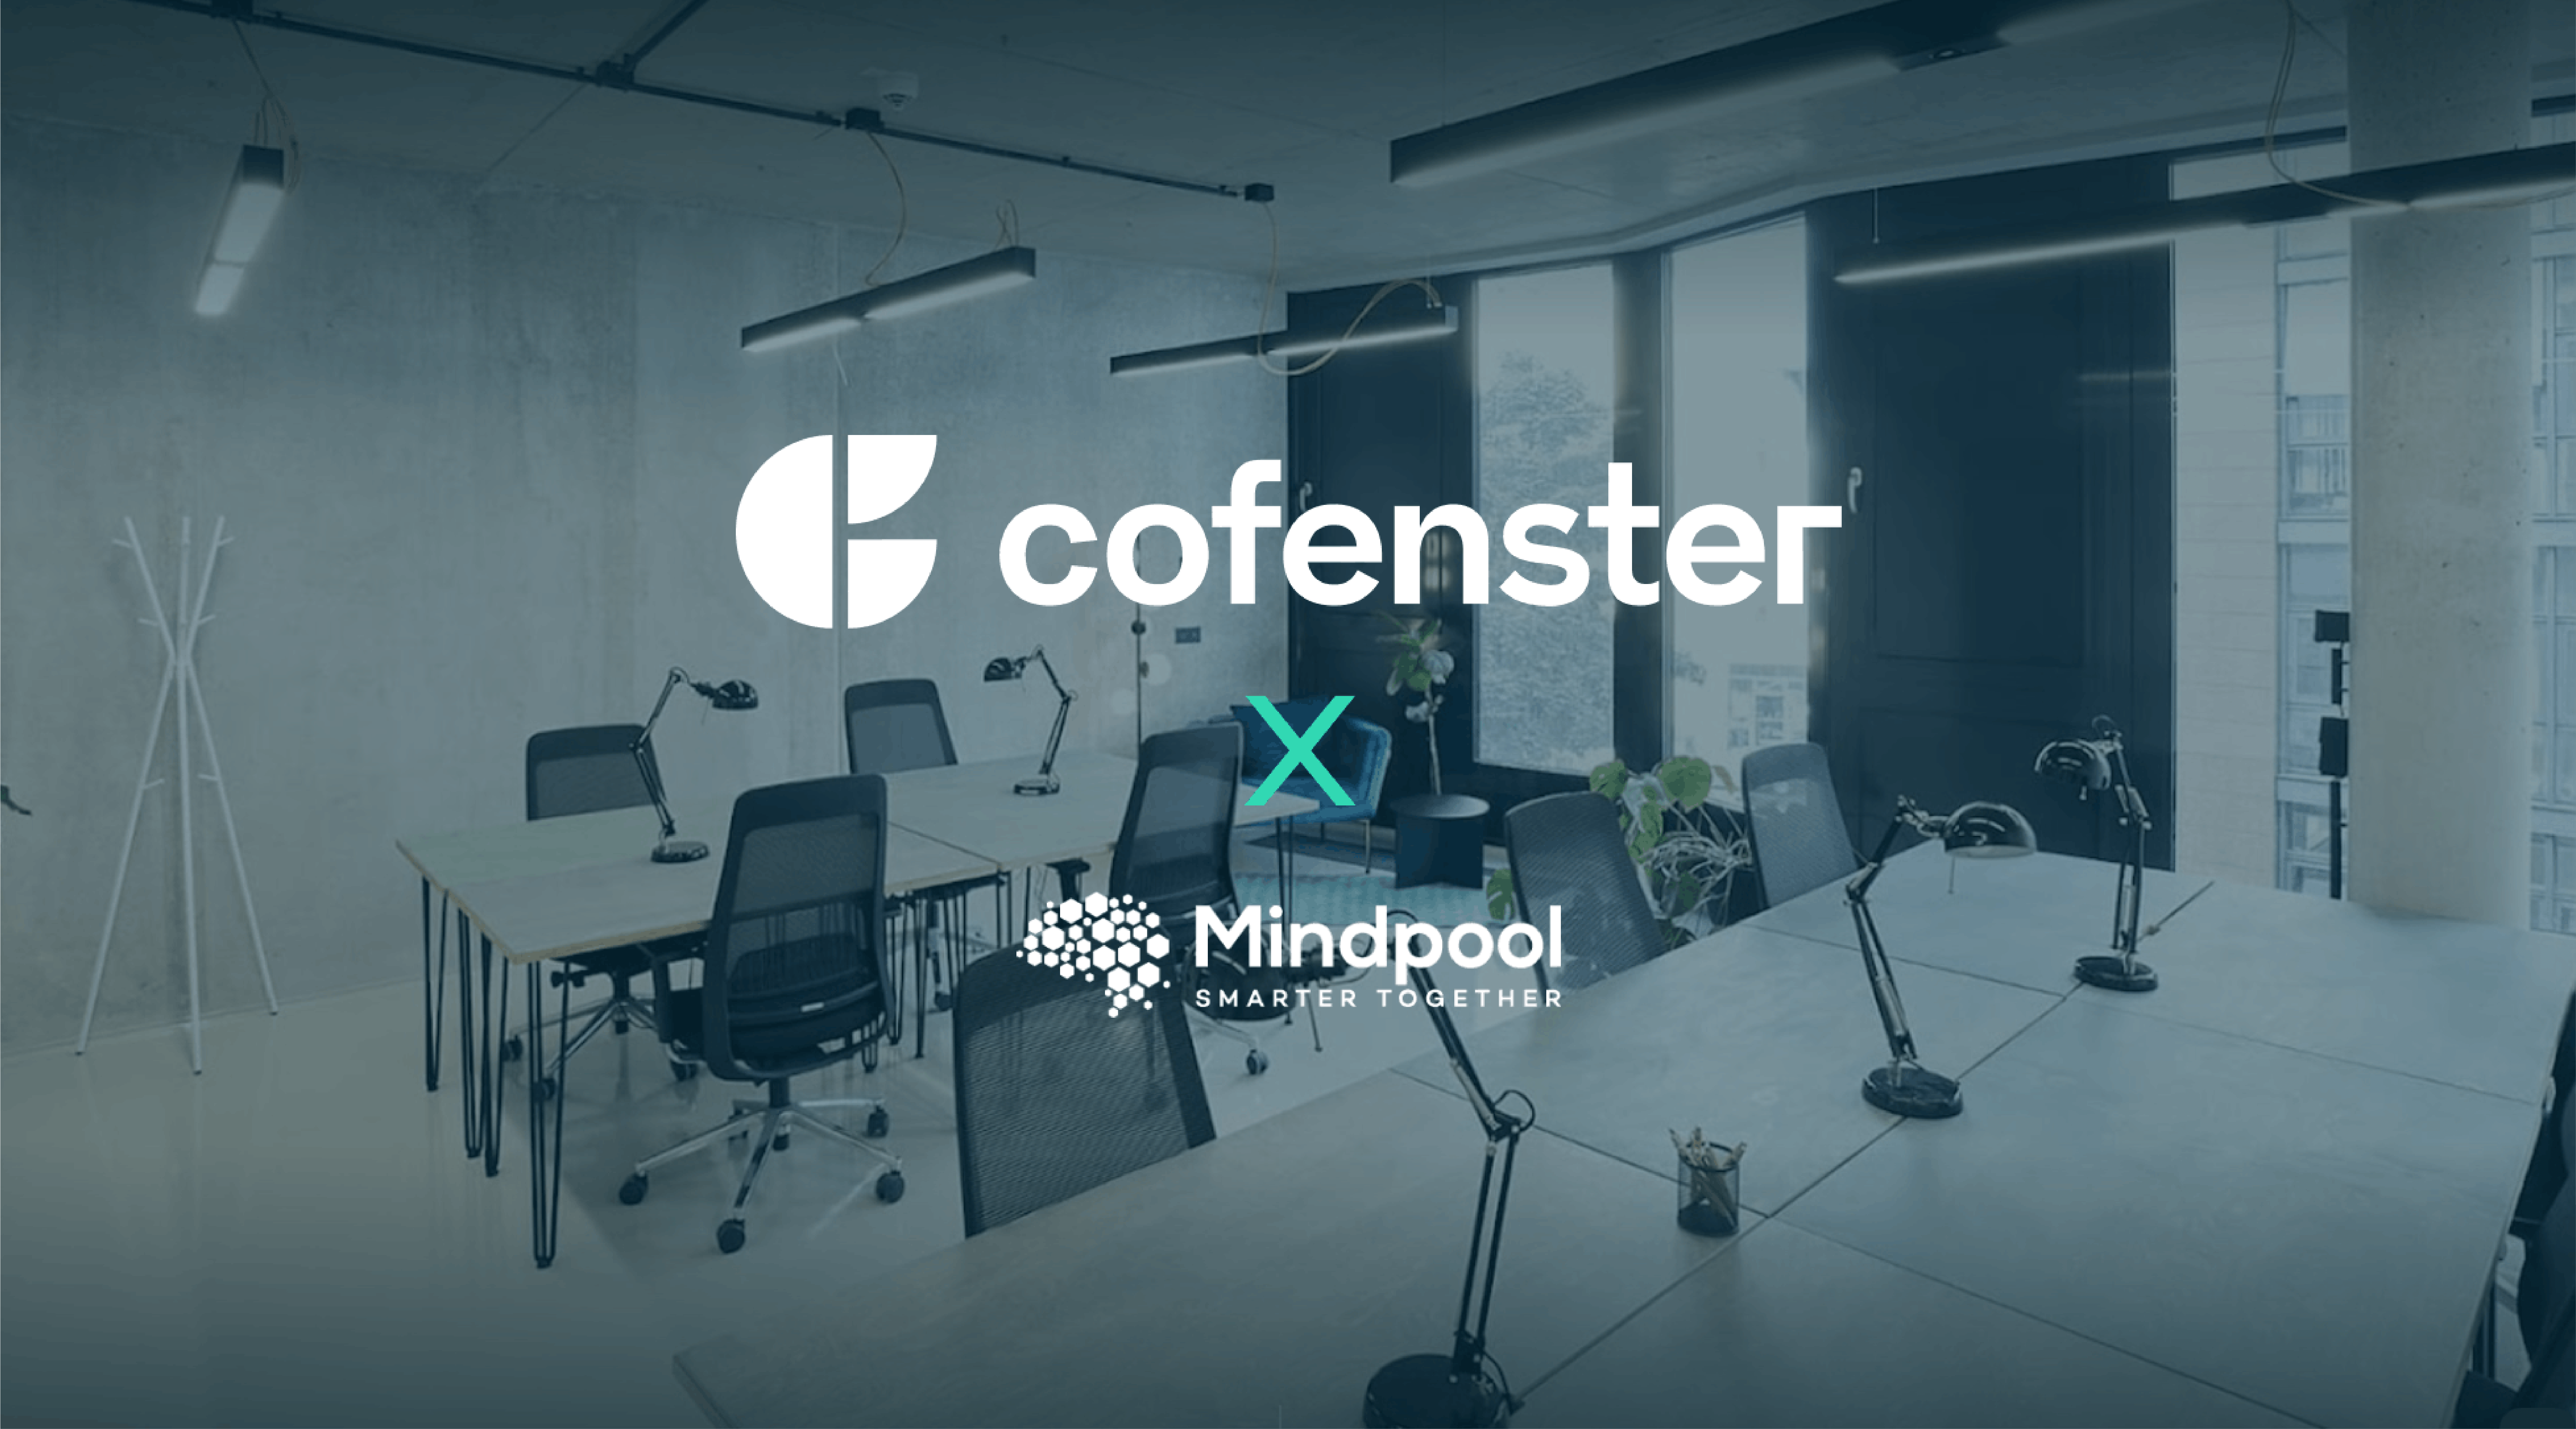 cofenster x Mindpool: how listening to employees helps manage growth 